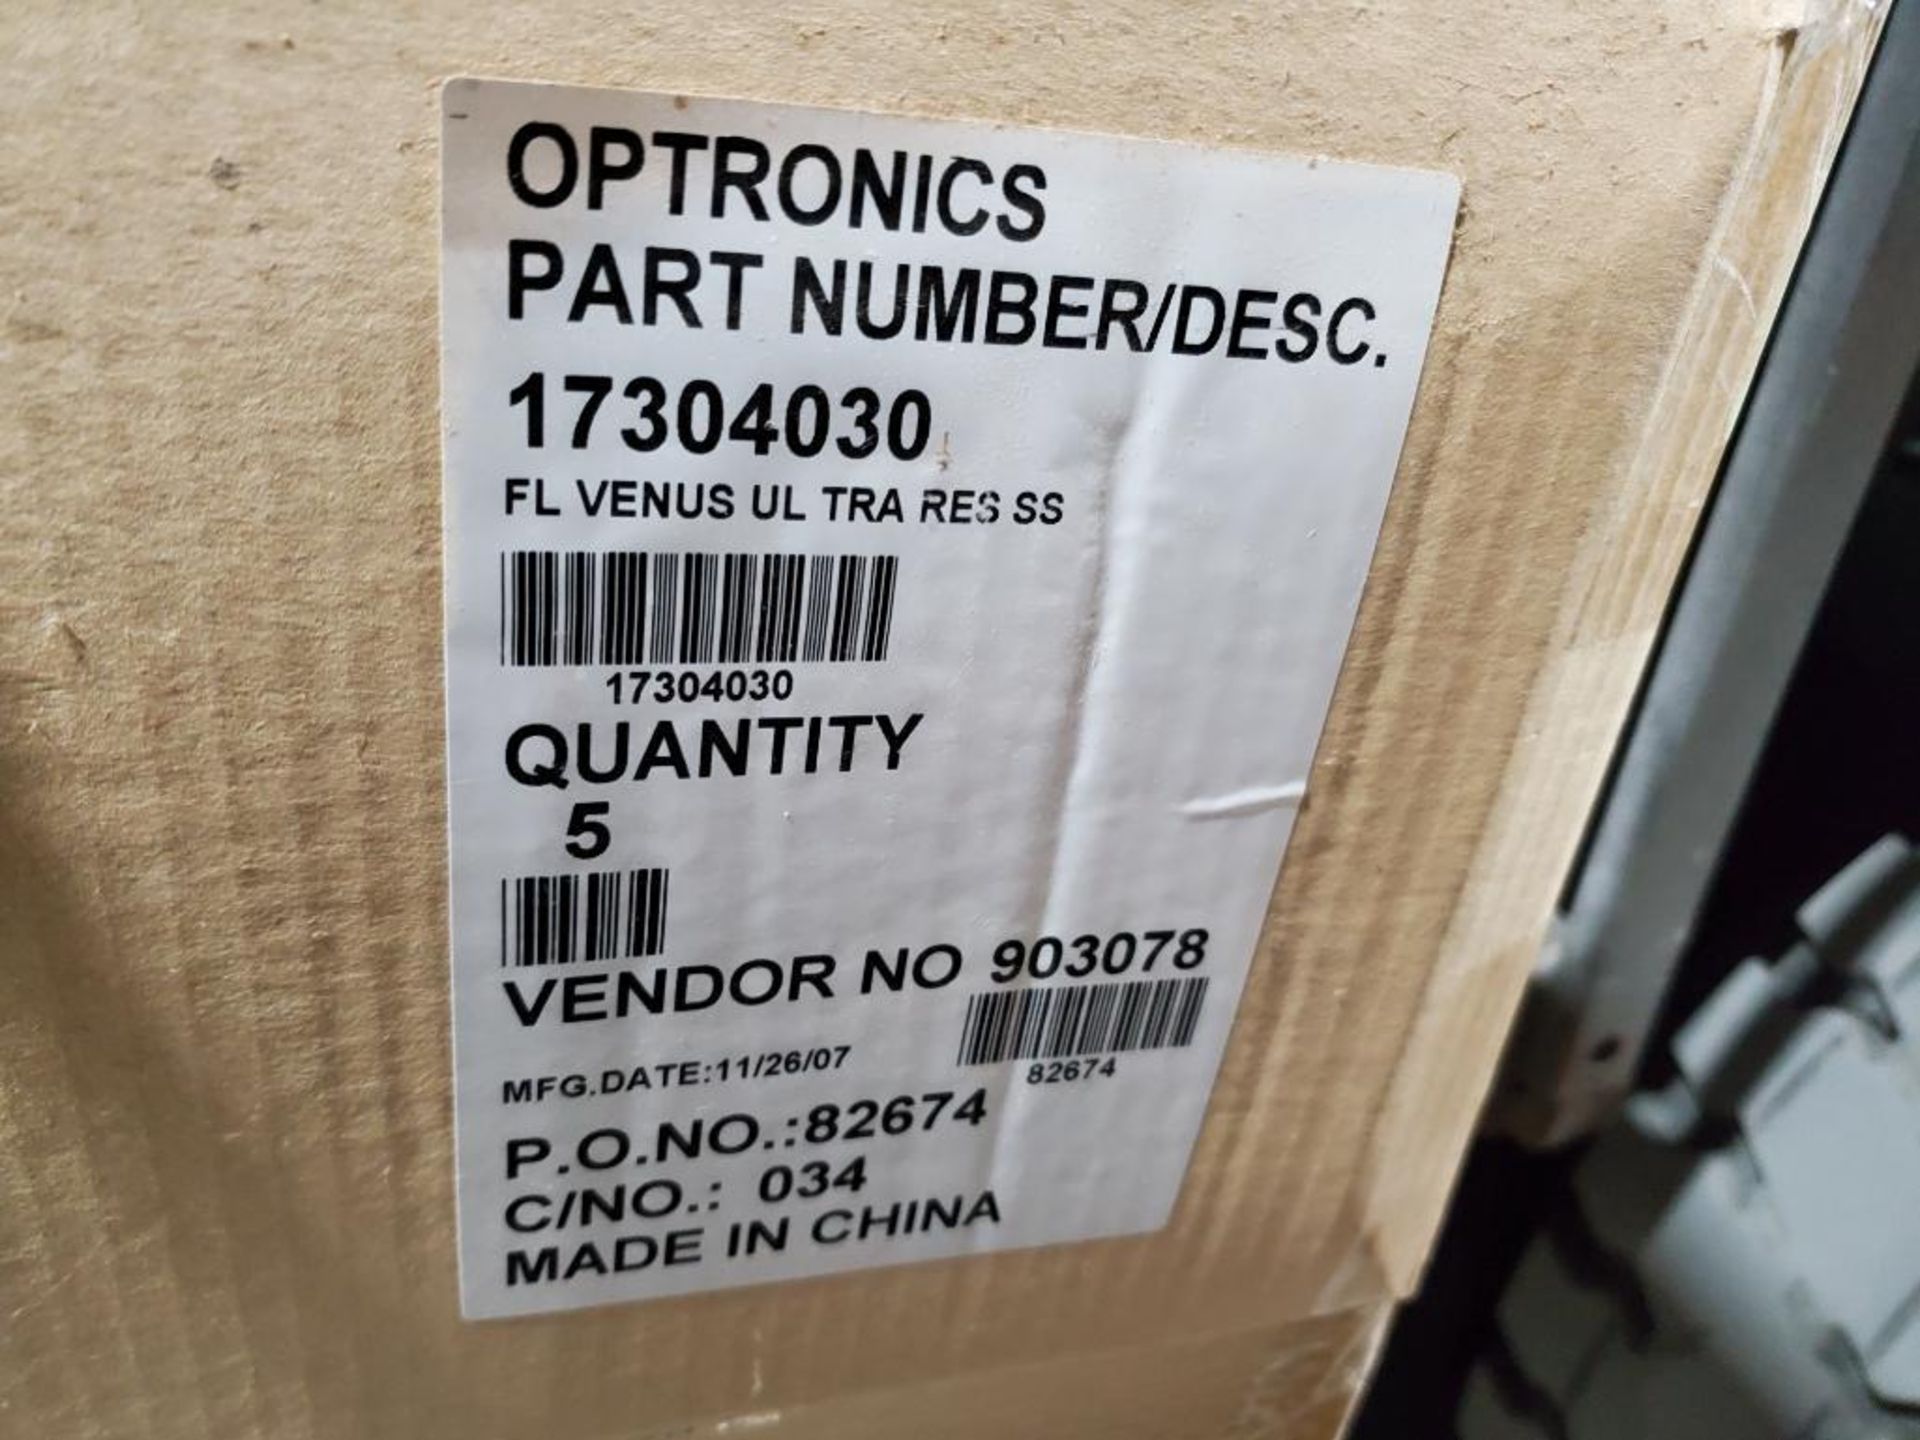 Qty 5 - Optronics light. Part number 17304030. - Image 6 of 6